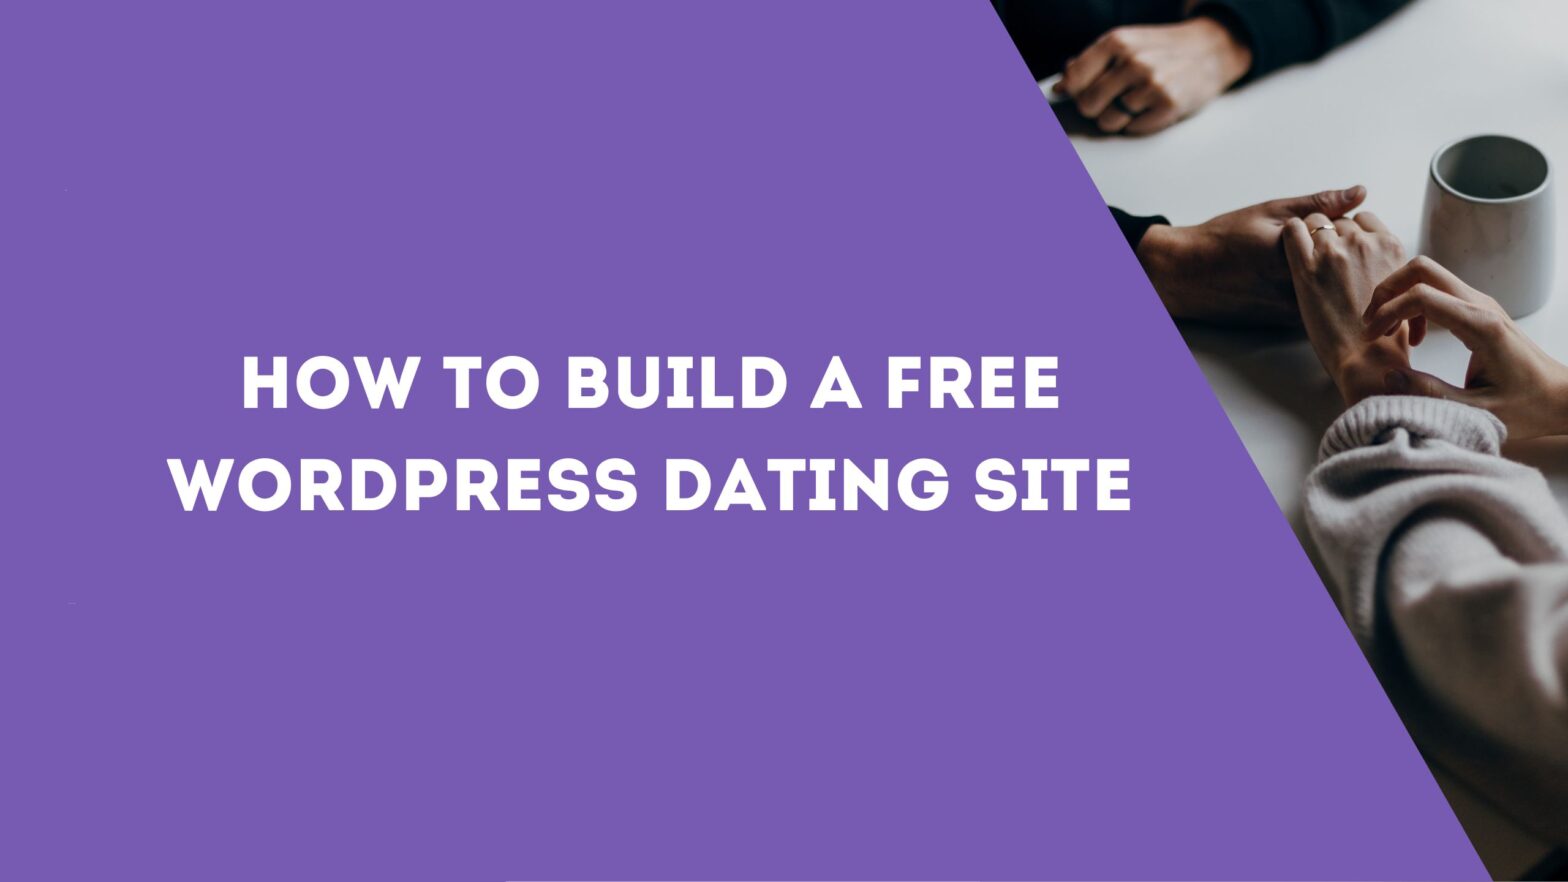 How to Build a Free WordPress Dating Site